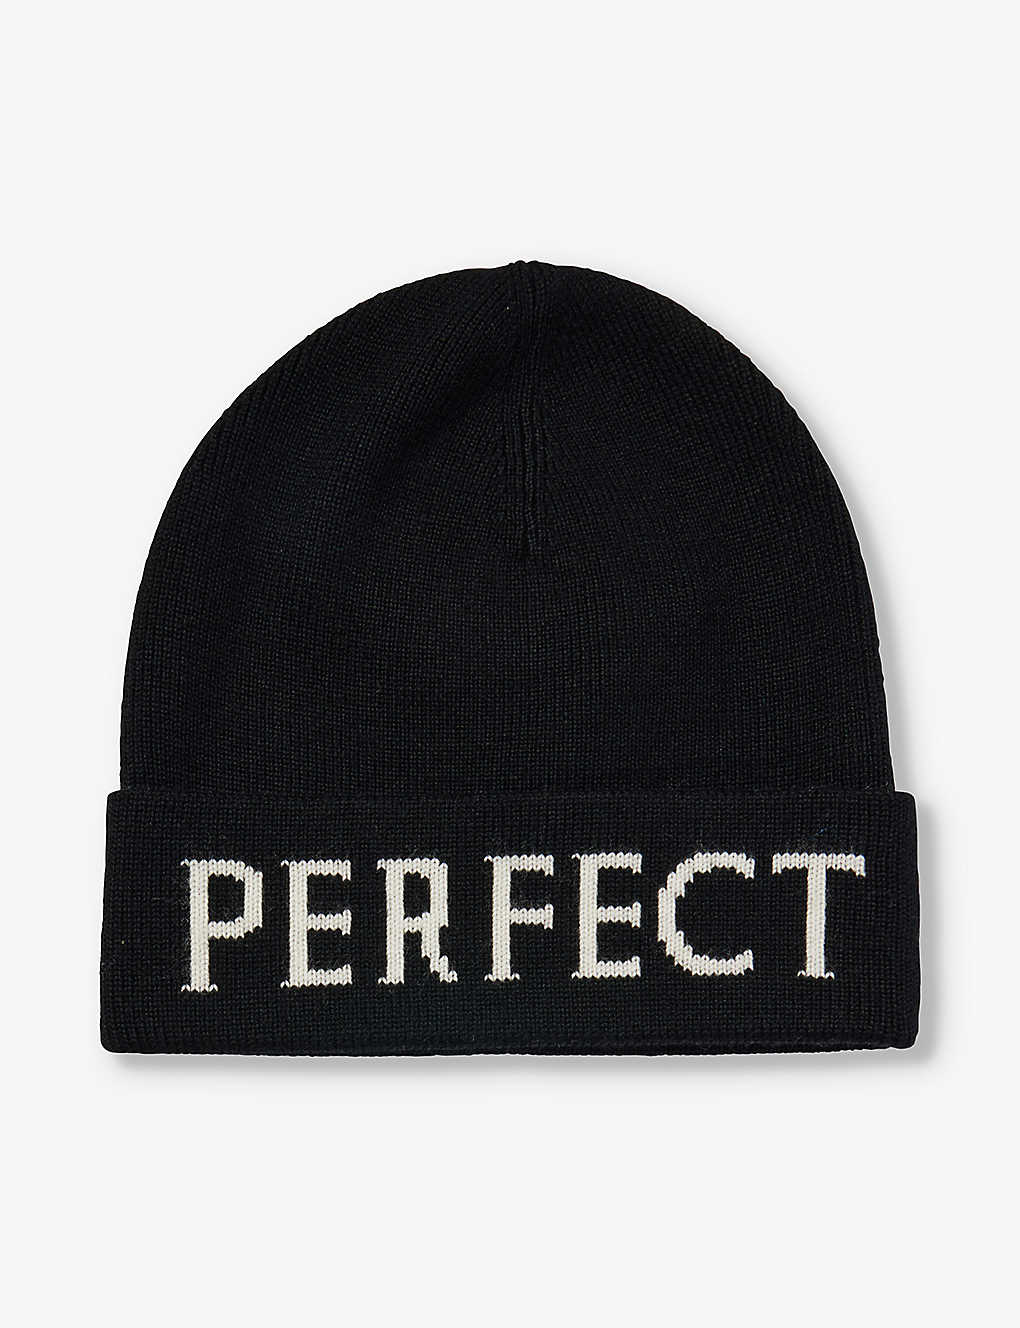 PERFECT MOMENT PERFECT MOMENT WOMEN'S BLACK BRANDED-PRINT WOOL BEANIE HAT